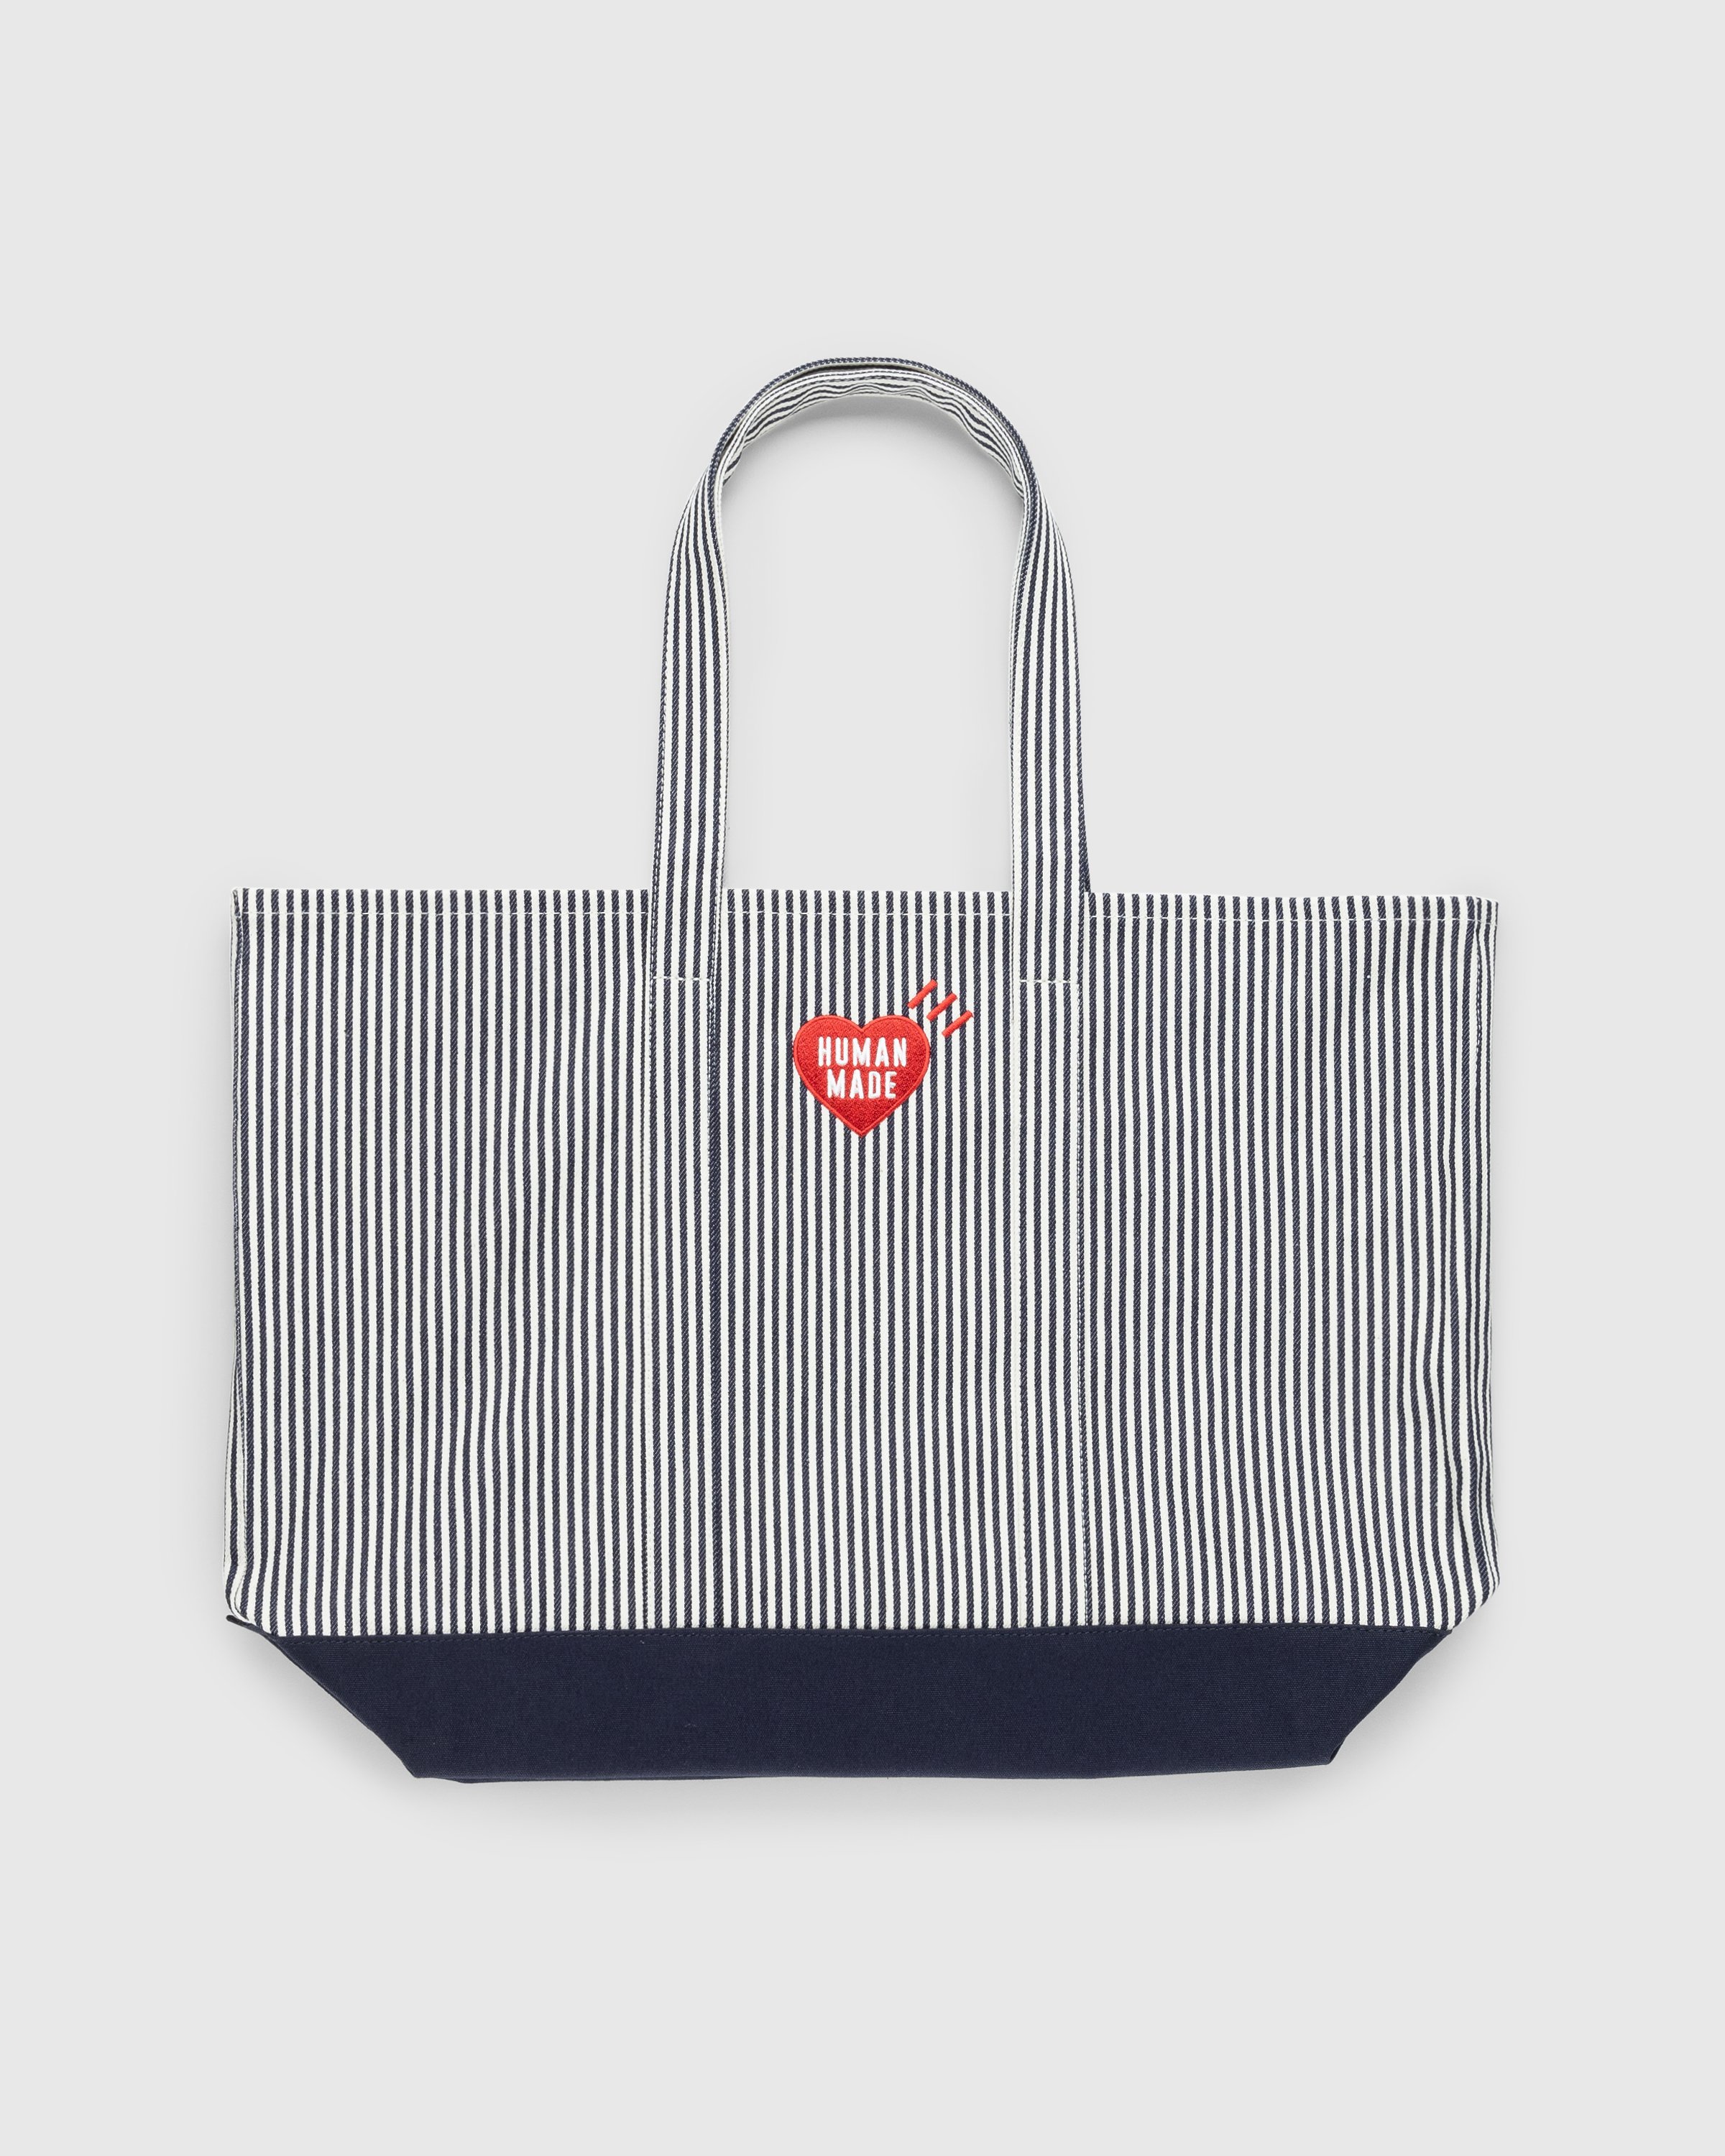 Human Made - Hickory Tote Blue - Accessories - Blue - Image 1